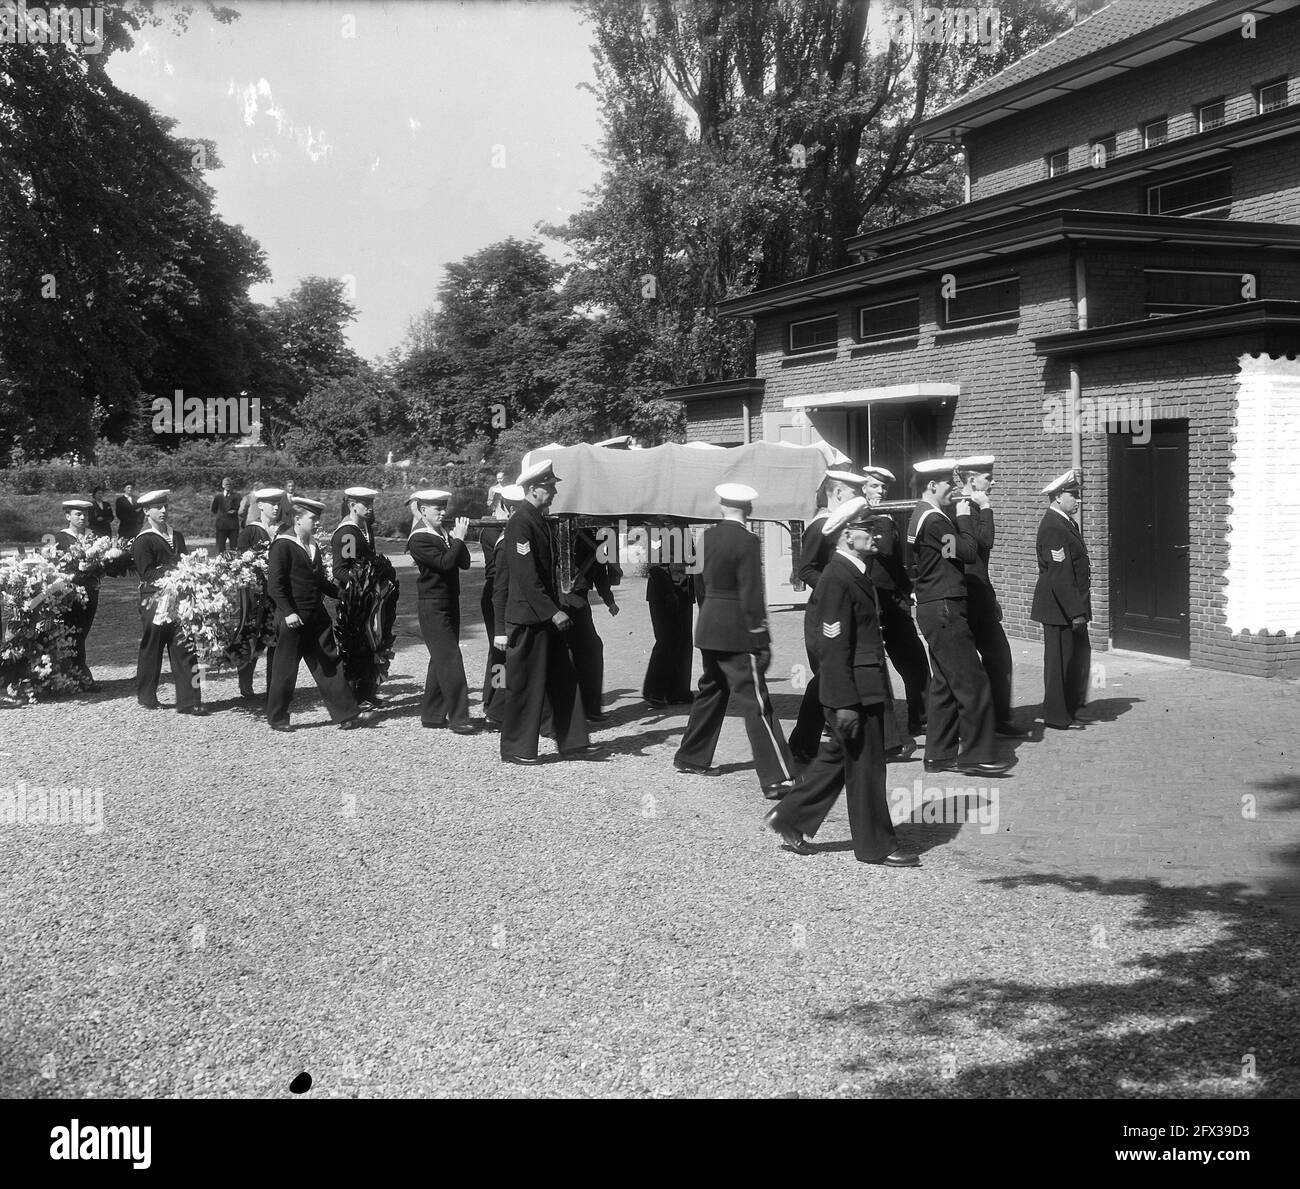 Military funeral The Hague, June 17, 1955, Funerals, The Netherlands, 20th century press agency photo, news to remember, documentary, historic photography 1945-1990, visual stories, human history of the Twentieth Century, capturing moments in time Stock Photo